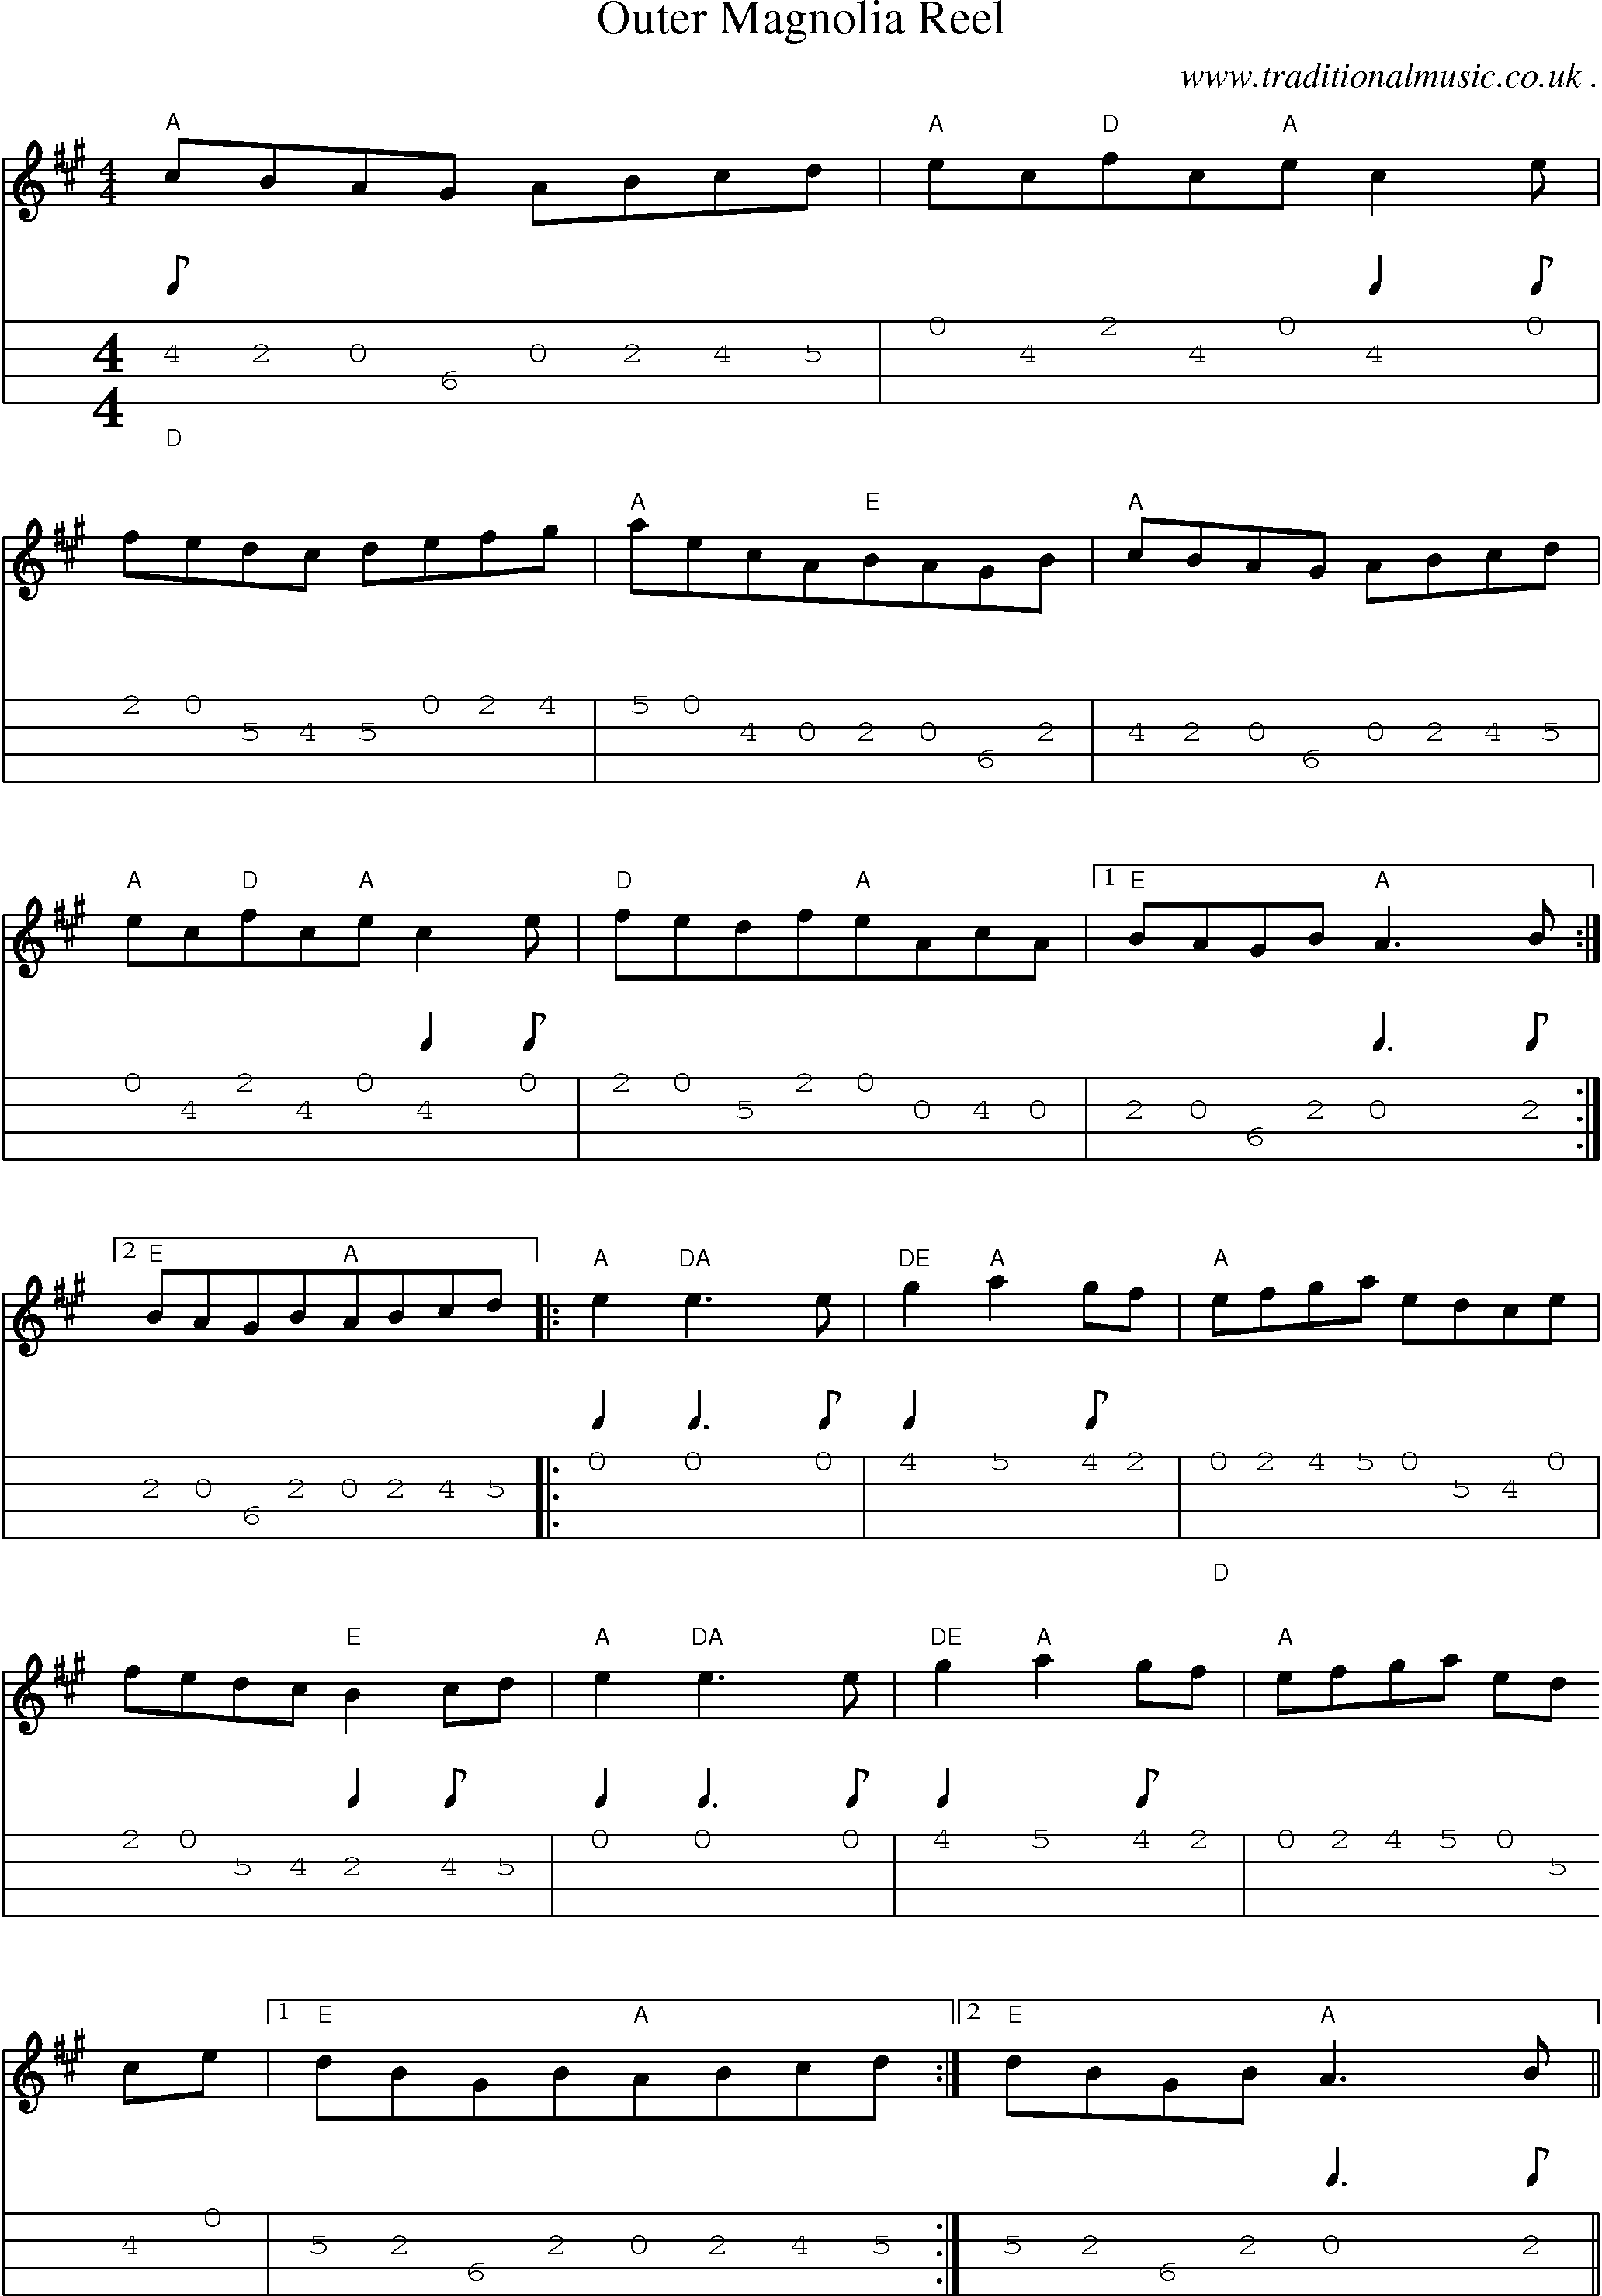 Sheet-Music and Mandolin Tabs for Outer Magnolia Reel